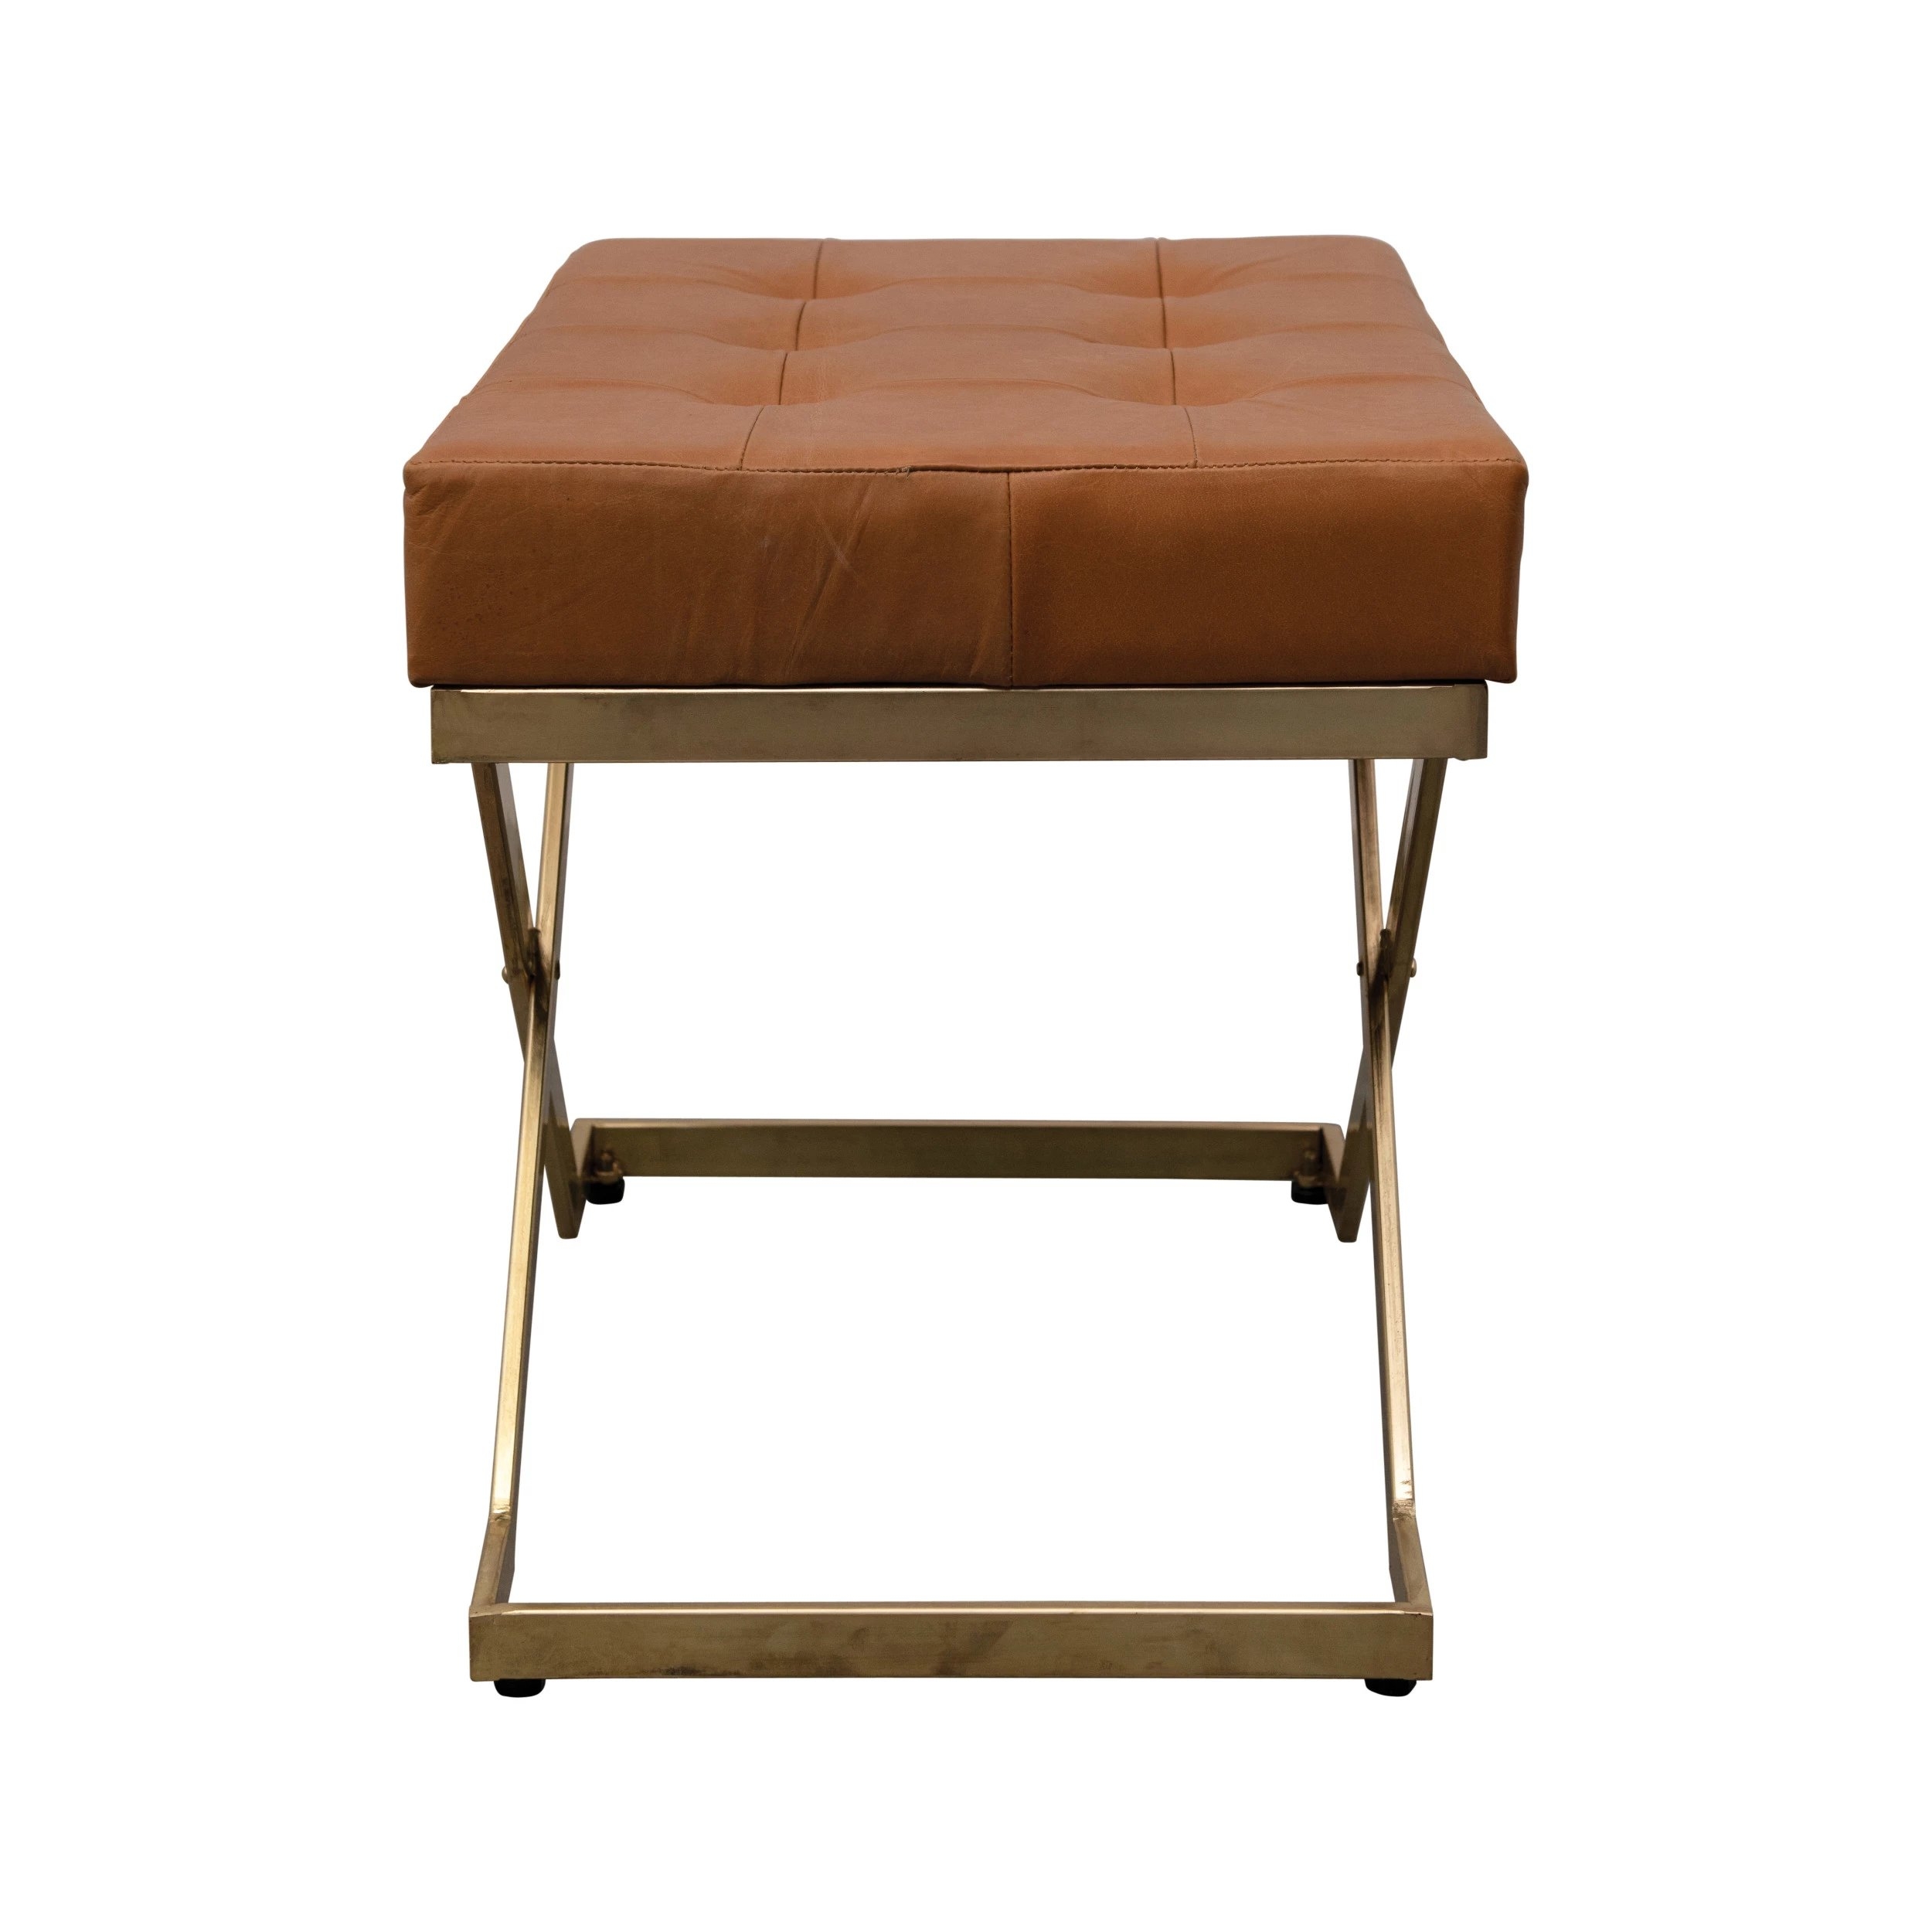 Tufted Leather Stool with Metal Legs - Image 2